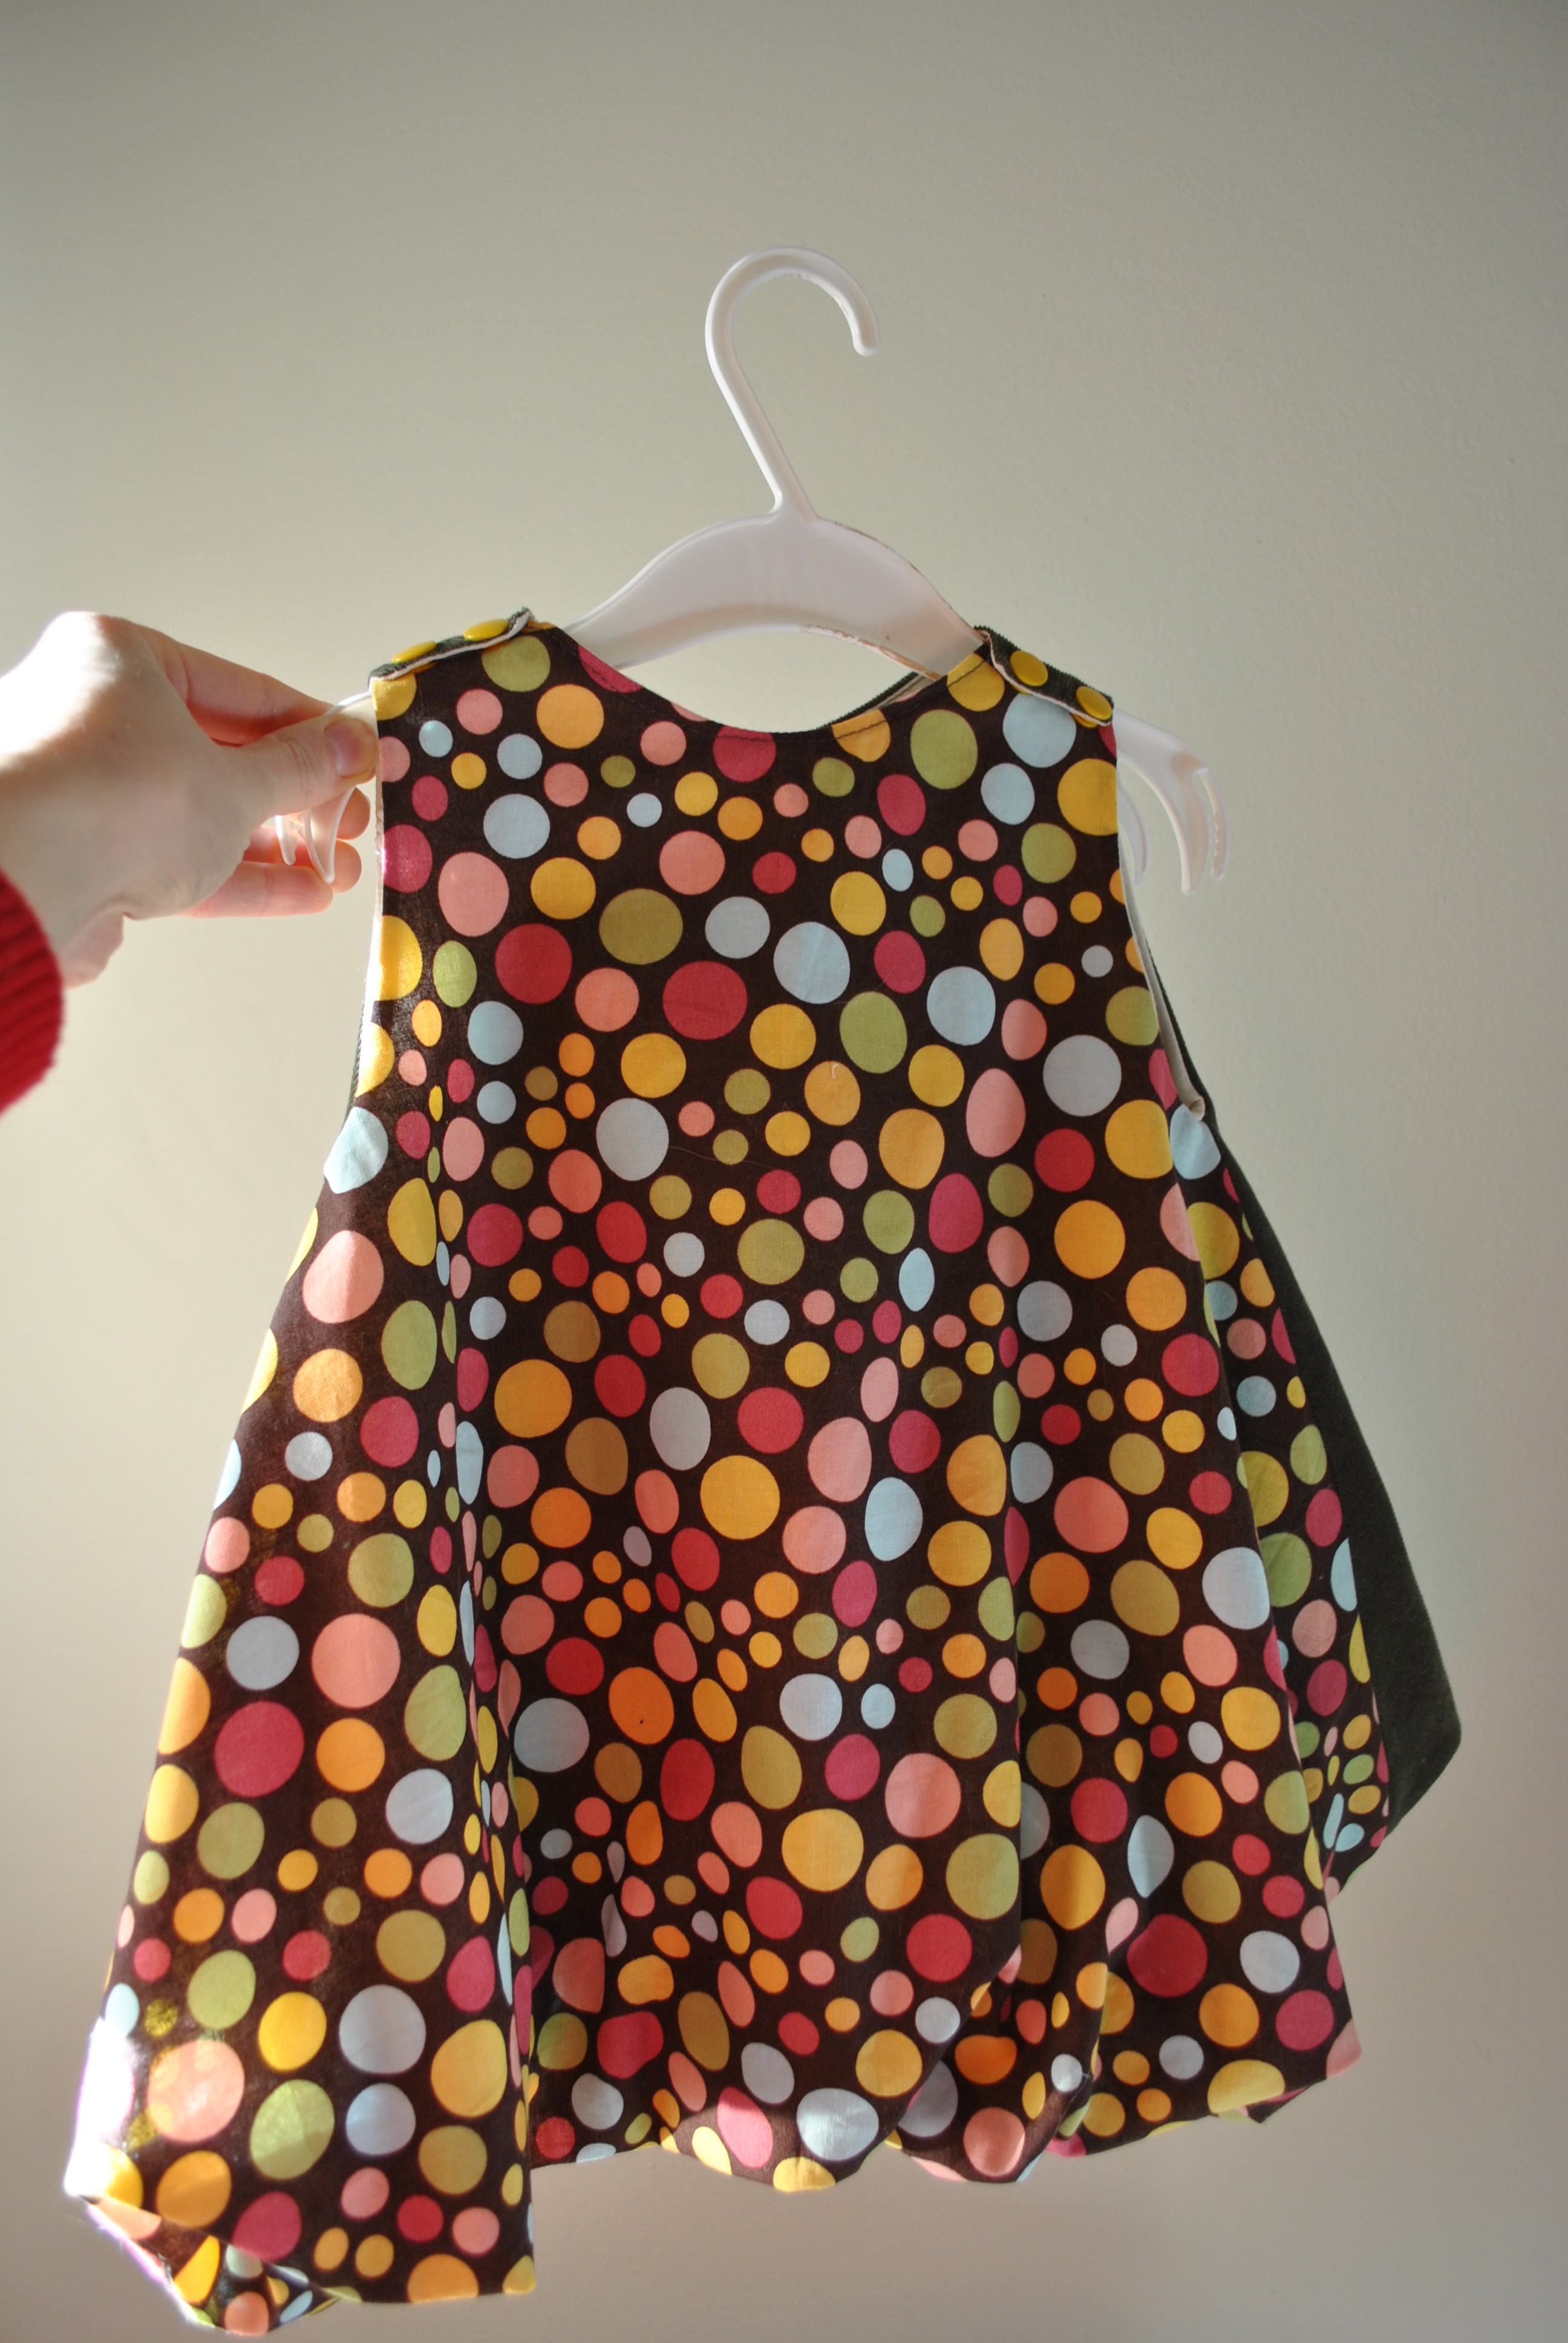 Baby Ballon Dress by Innocentia – Sewing Projects | BurdaStyle.com